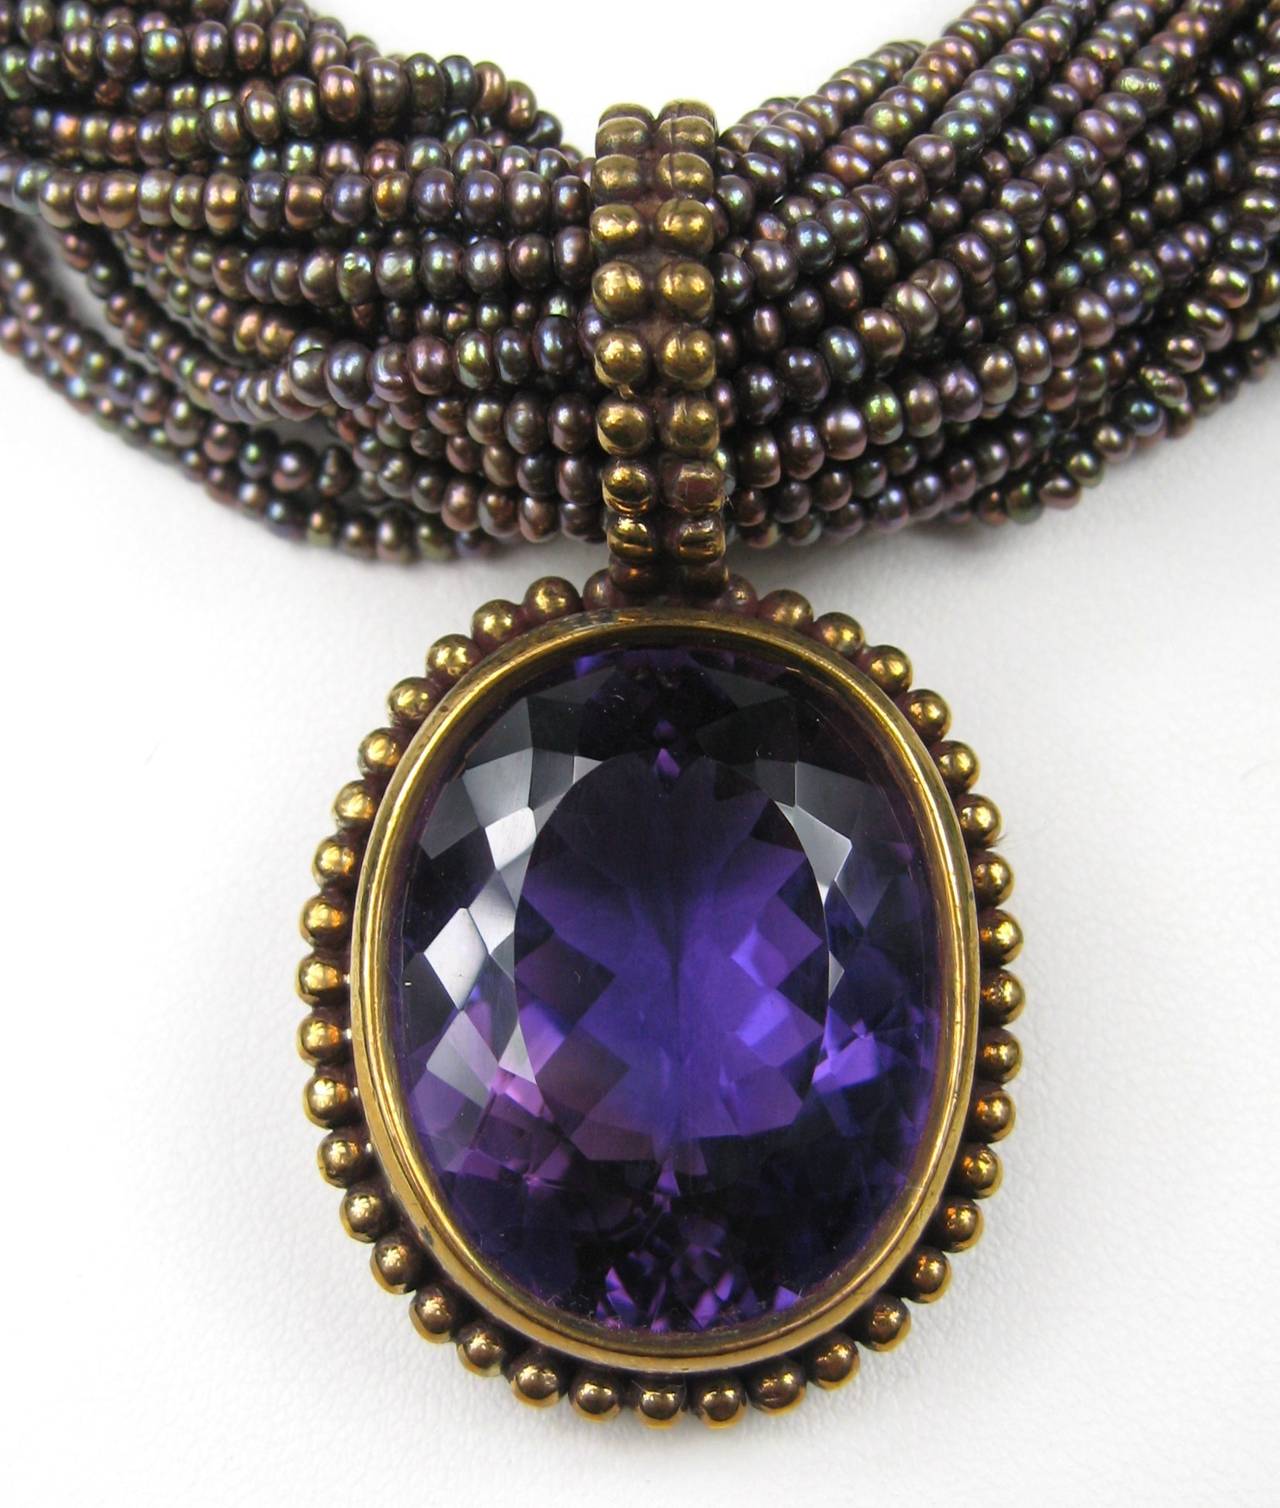 Dweck Bronze Amethyst Drop Necklace, simply stunning! Necklace is made up of tiny amethyst beads 32 strands. Drop at the bottom is a faceted Amethyst. measures 17 inches  end to end. Price tag sill attached. This is out of a massive collection of